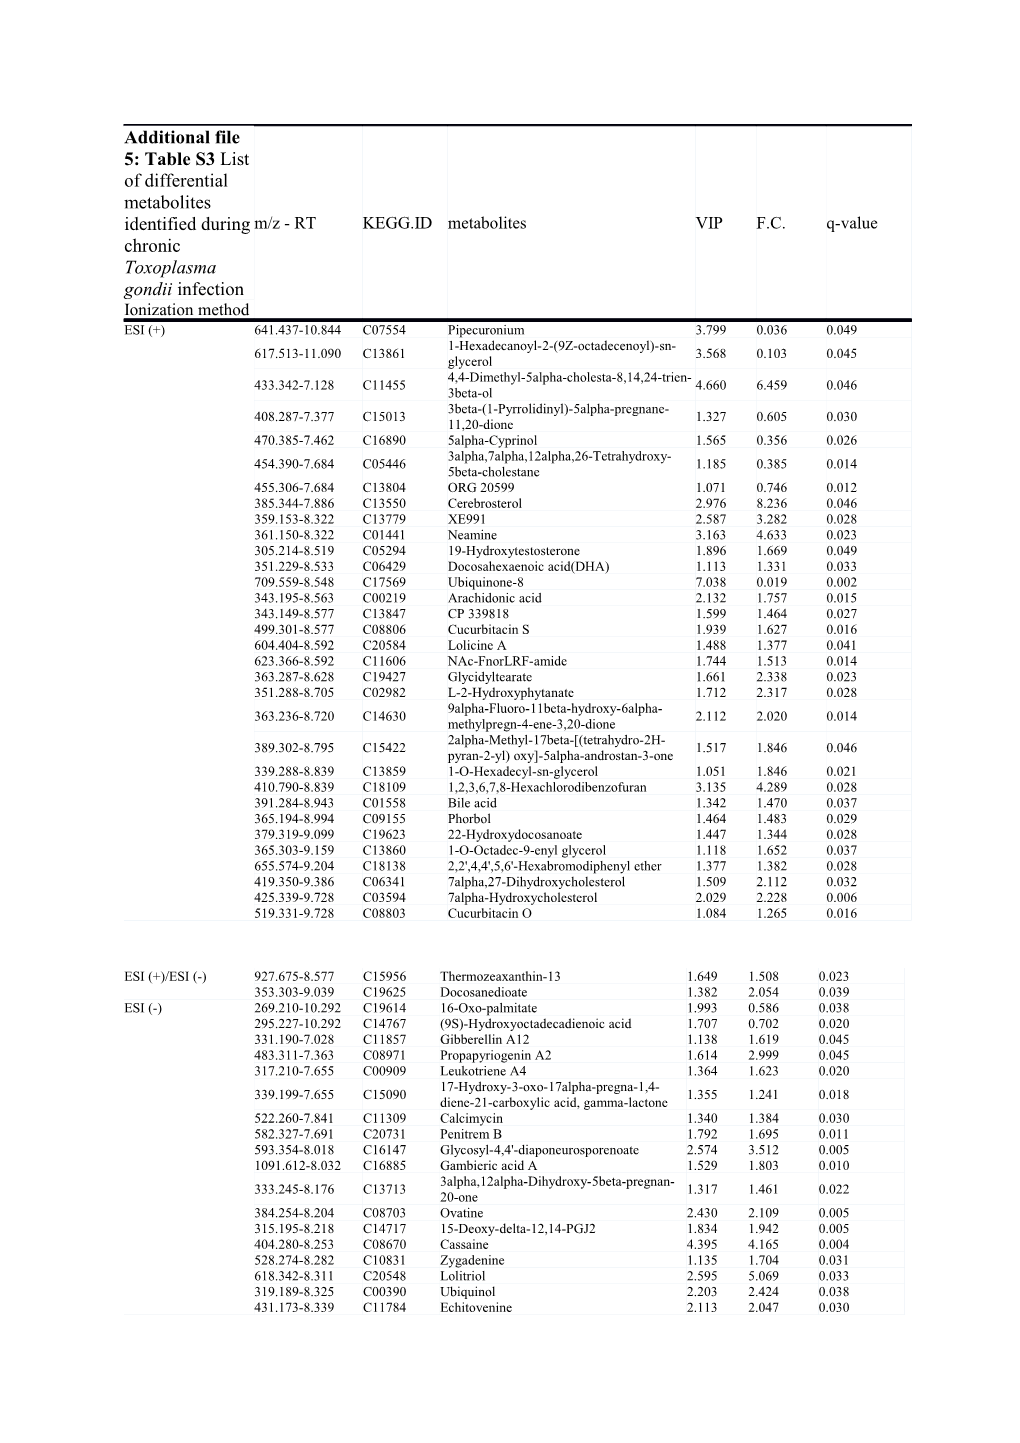 Additional File 5: Table S3 List of Differential Metabolites Identified During Chronic